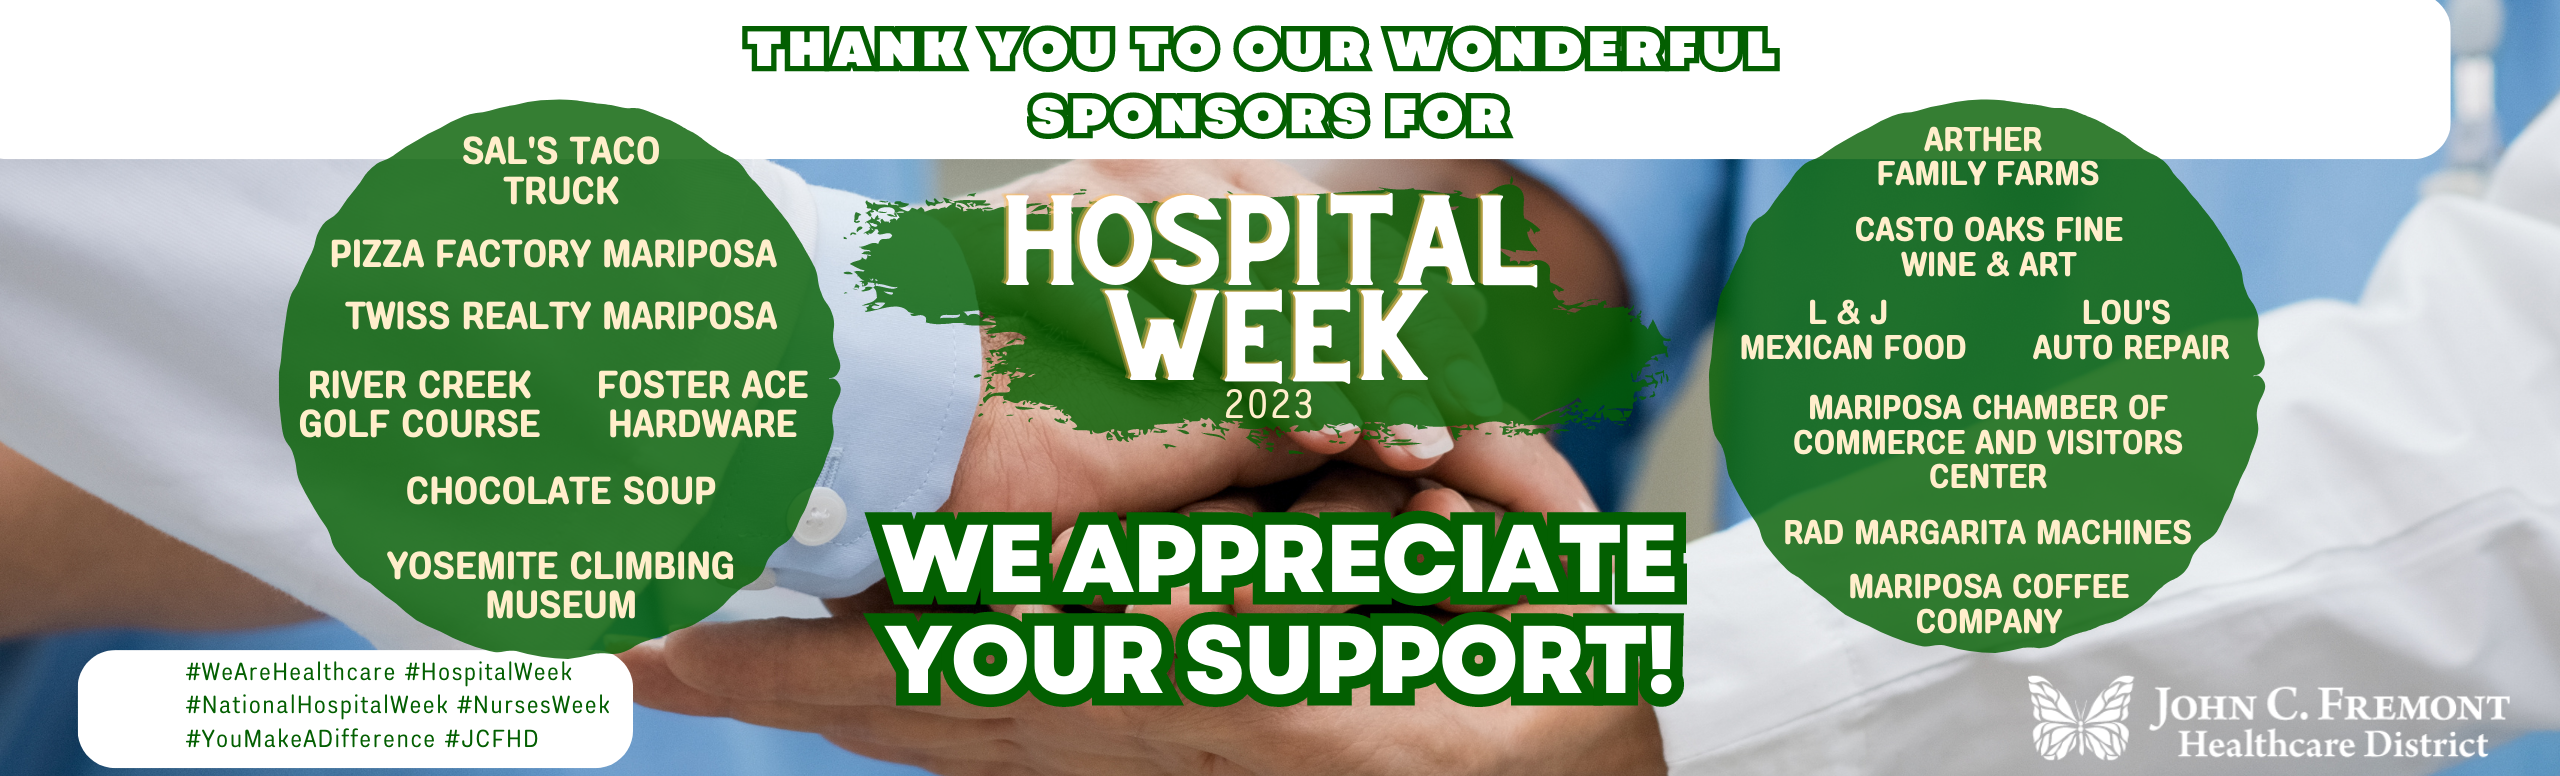 Thank you to our 2023 Hospital Week Sponsors: Arther Family Farms, Foster Ace Hardware, Casto Oaks Fine Wine and Art, Lou's Auto Repair, Chocolate Soup, Mariposa Chamber of Commerce and Visitors Center, Yosemite Climbing Museum, Mariposa Coffee Company, Twiss Realty Mariposa, River Creek Golf Course, Sal's Taco Truck, L & J Mexican Food, Pizza Factory Mariposa and RAD Margarita Machines